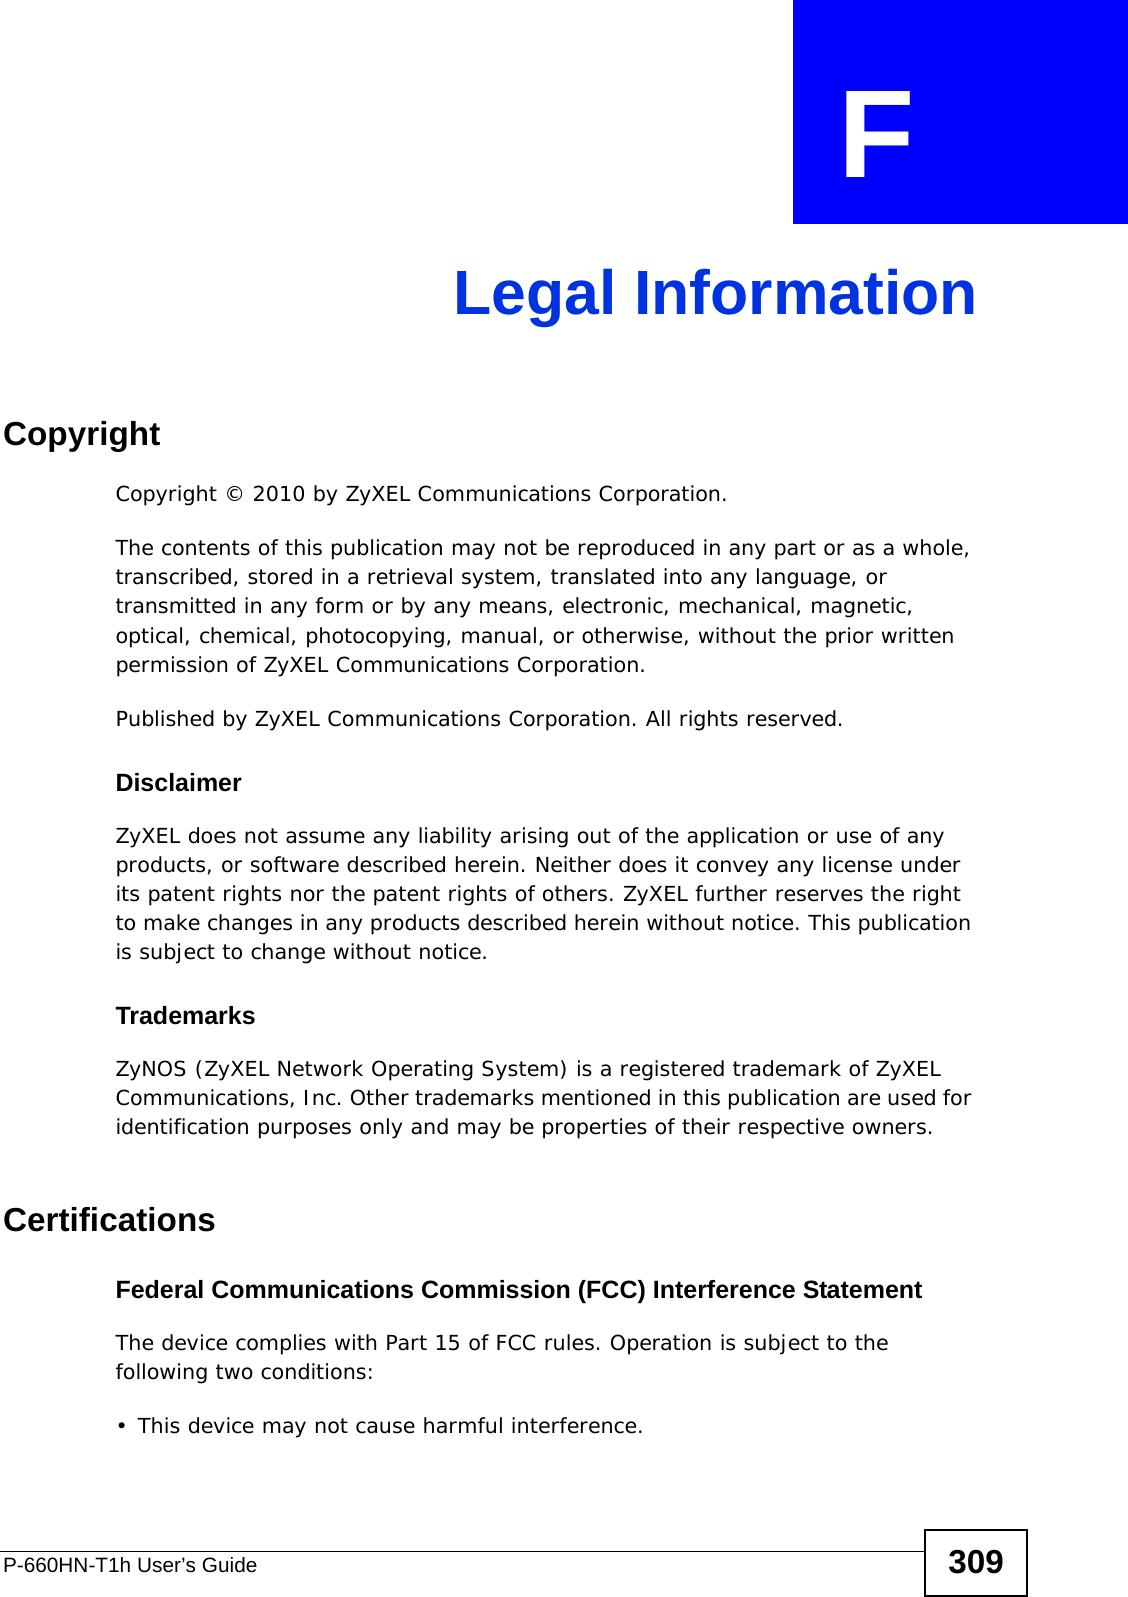 P-660HN-T1h User’s Guide 309APPENDIX  F Legal InformationCopyrightCopyright © 2010 by ZyXEL Communications Corporation.The contents of this publication may not be reproduced in any part or as a whole, transcribed, stored in a retrieval system, translated into any language, or transmitted in any form or by any means, electronic, mechanical, magnetic, optical, chemical, photocopying, manual, or otherwise, without the prior written permission of ZyXEL Communications Corporation.Published by ZyXEL Communications Corporation. All rights reserved.DisclaimerZyXEL does not assume any liability arising out of the application or use of any products, or software described herein. Neither does it convey any license under its patent rights nor the patent rights of others. ZyXEL further reserves the right to make changes in any products described herein without notice. This publication is subject to change without notice.TrademarksZyNOS (ZyXEL Network Operating System) is a registered trademark of ZyXEL Communications, Inc. Other trademarks mentioned in this publication are used for identification purposes only and may be properties of their respective owners.Certifications Federal Communications Commission (FCC) Interference StatementThe device complies with Part 15 of FCC rules. Operation is subject to the following two conditions:• This device may not cause harmful interference.